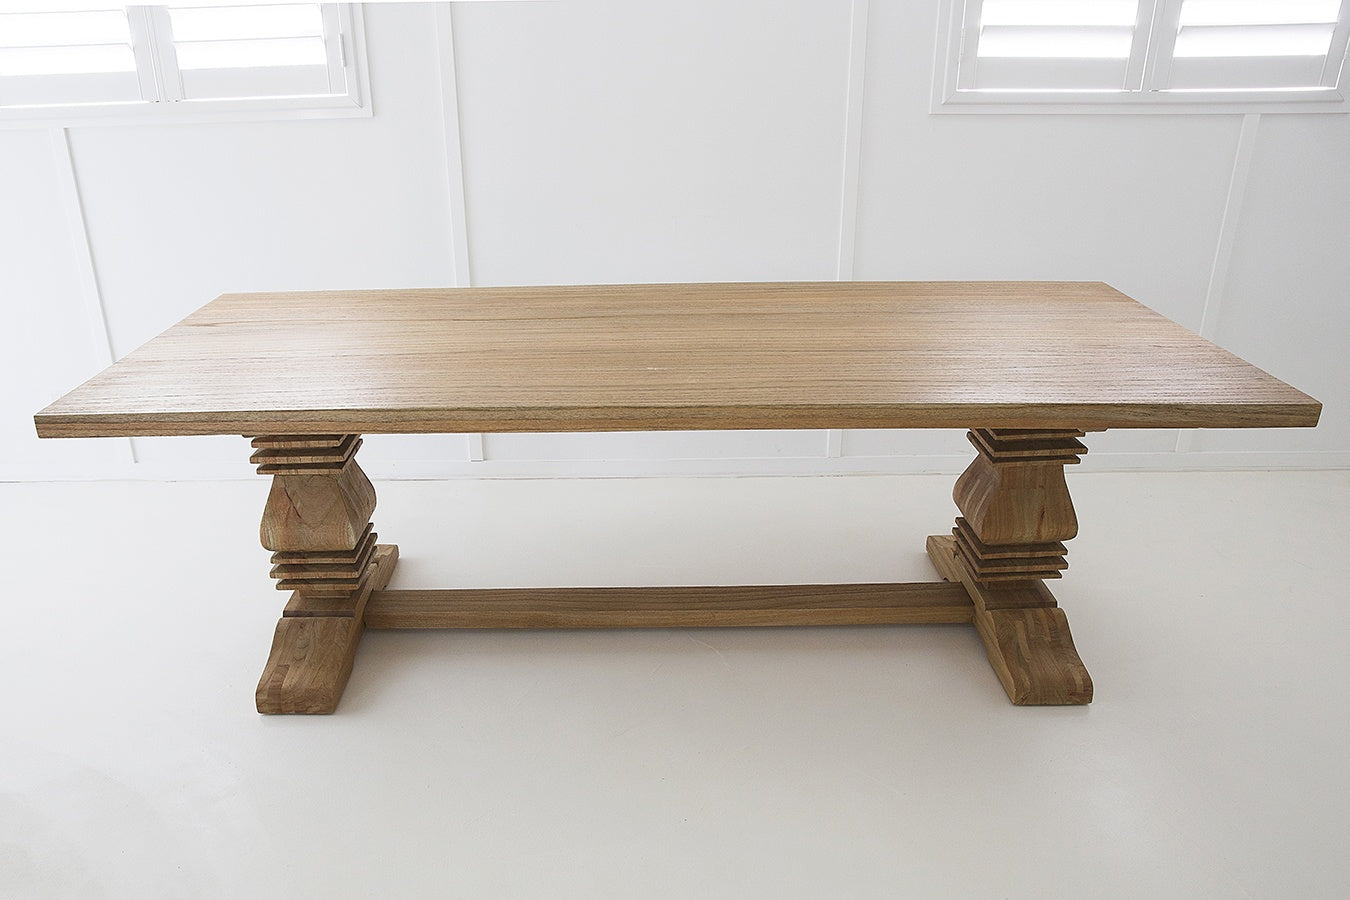 Clearwater Pedestal Table - 180cm